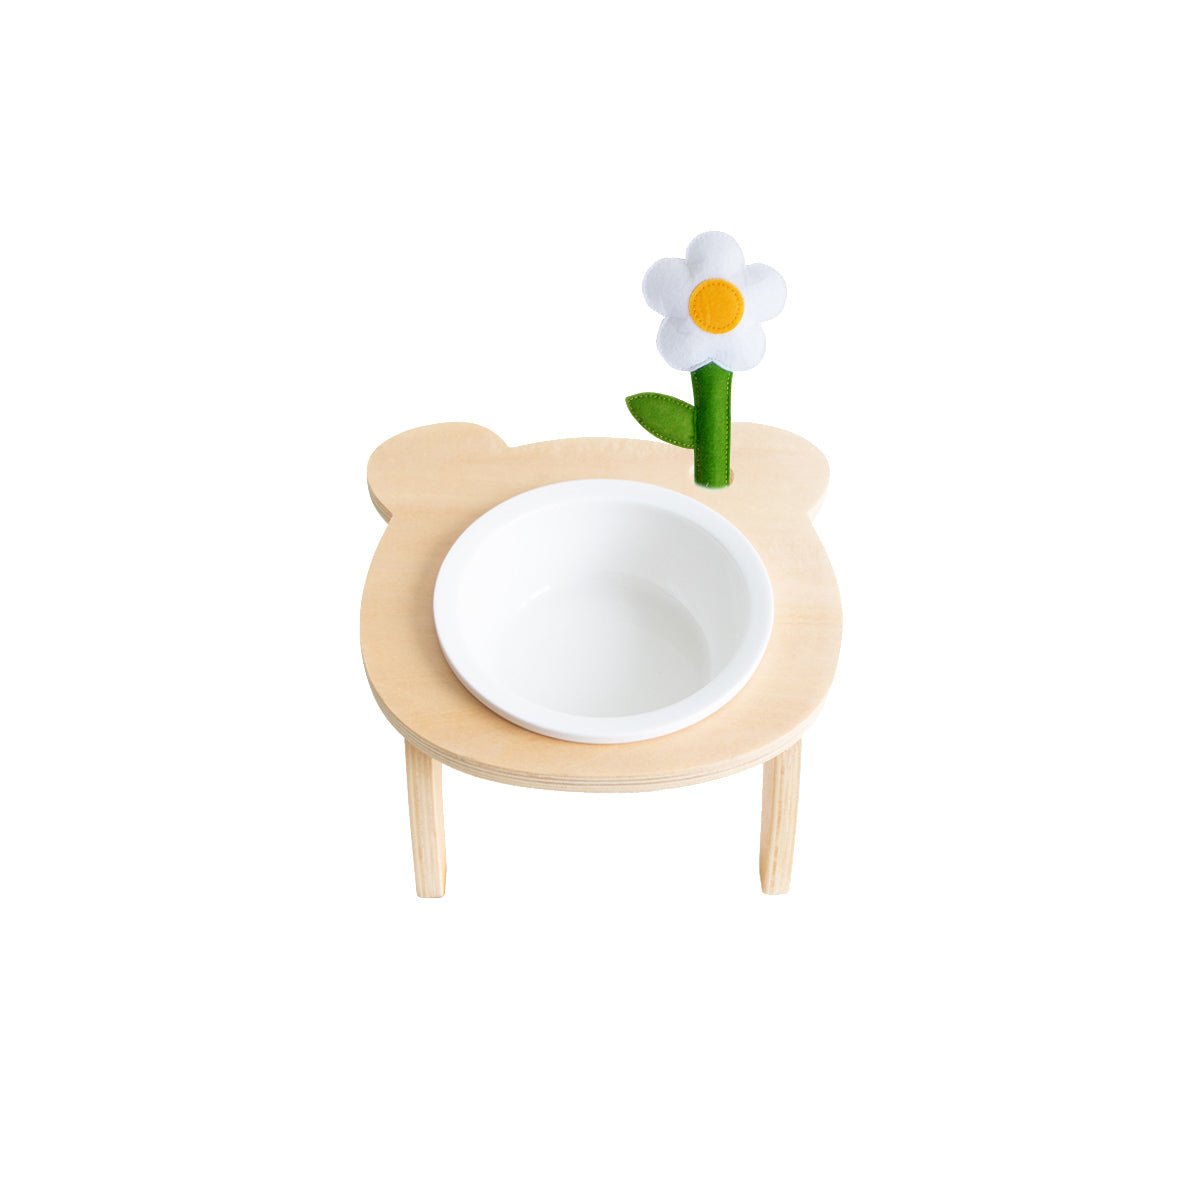 Daisy Tilted Single Pet Bowl With Stand - 0cm